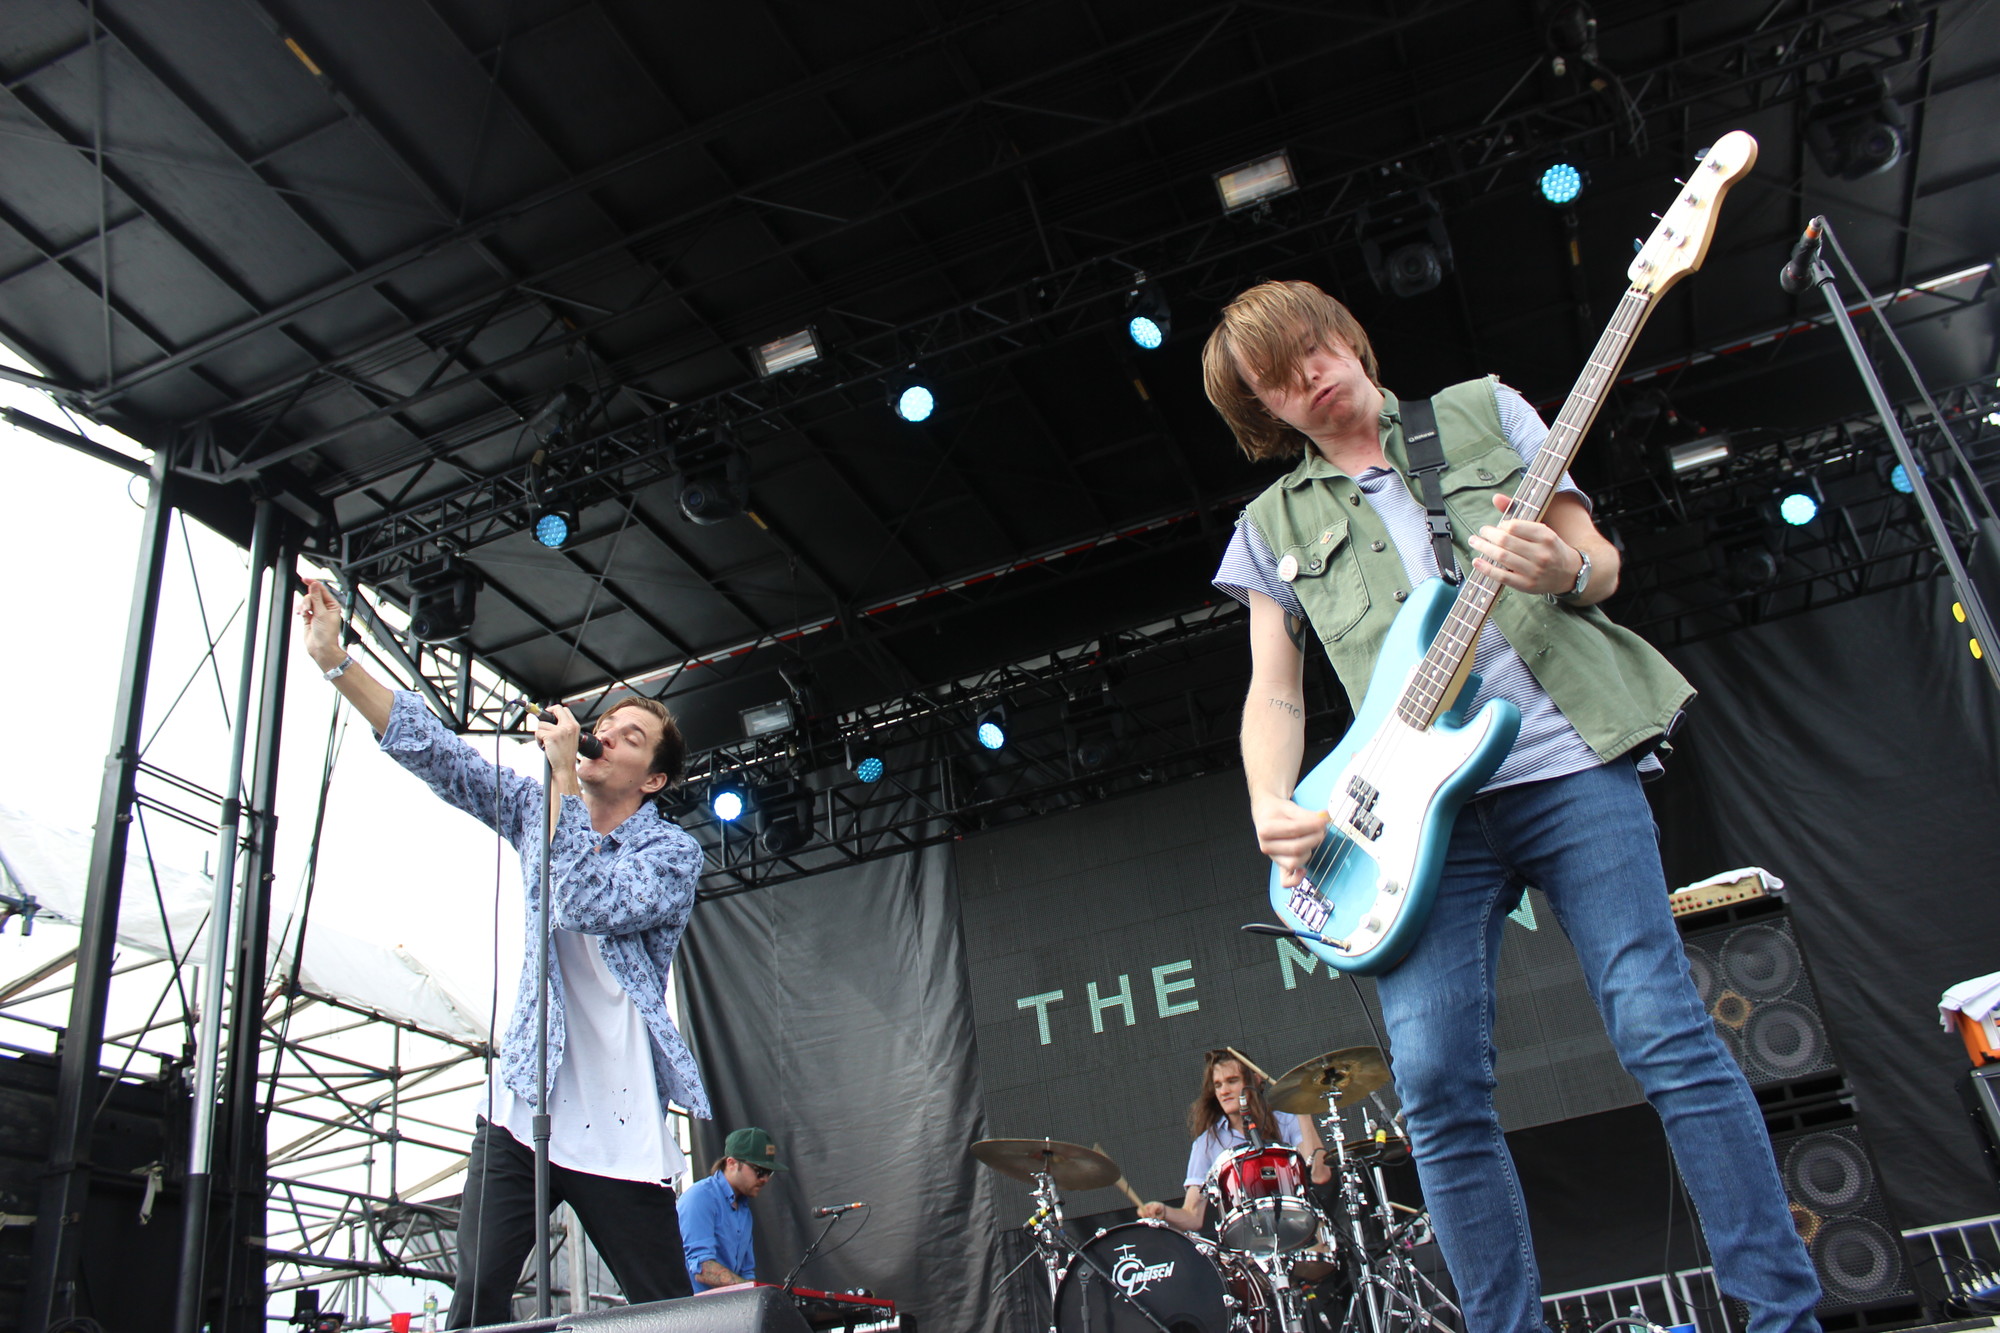 The Maine delighted the crowd on the Samsung Level Stage at Jones Beach last Sunday afternoon during the inaugural Billboard Hot 100 Music Festival, which featured more than 50 artists.